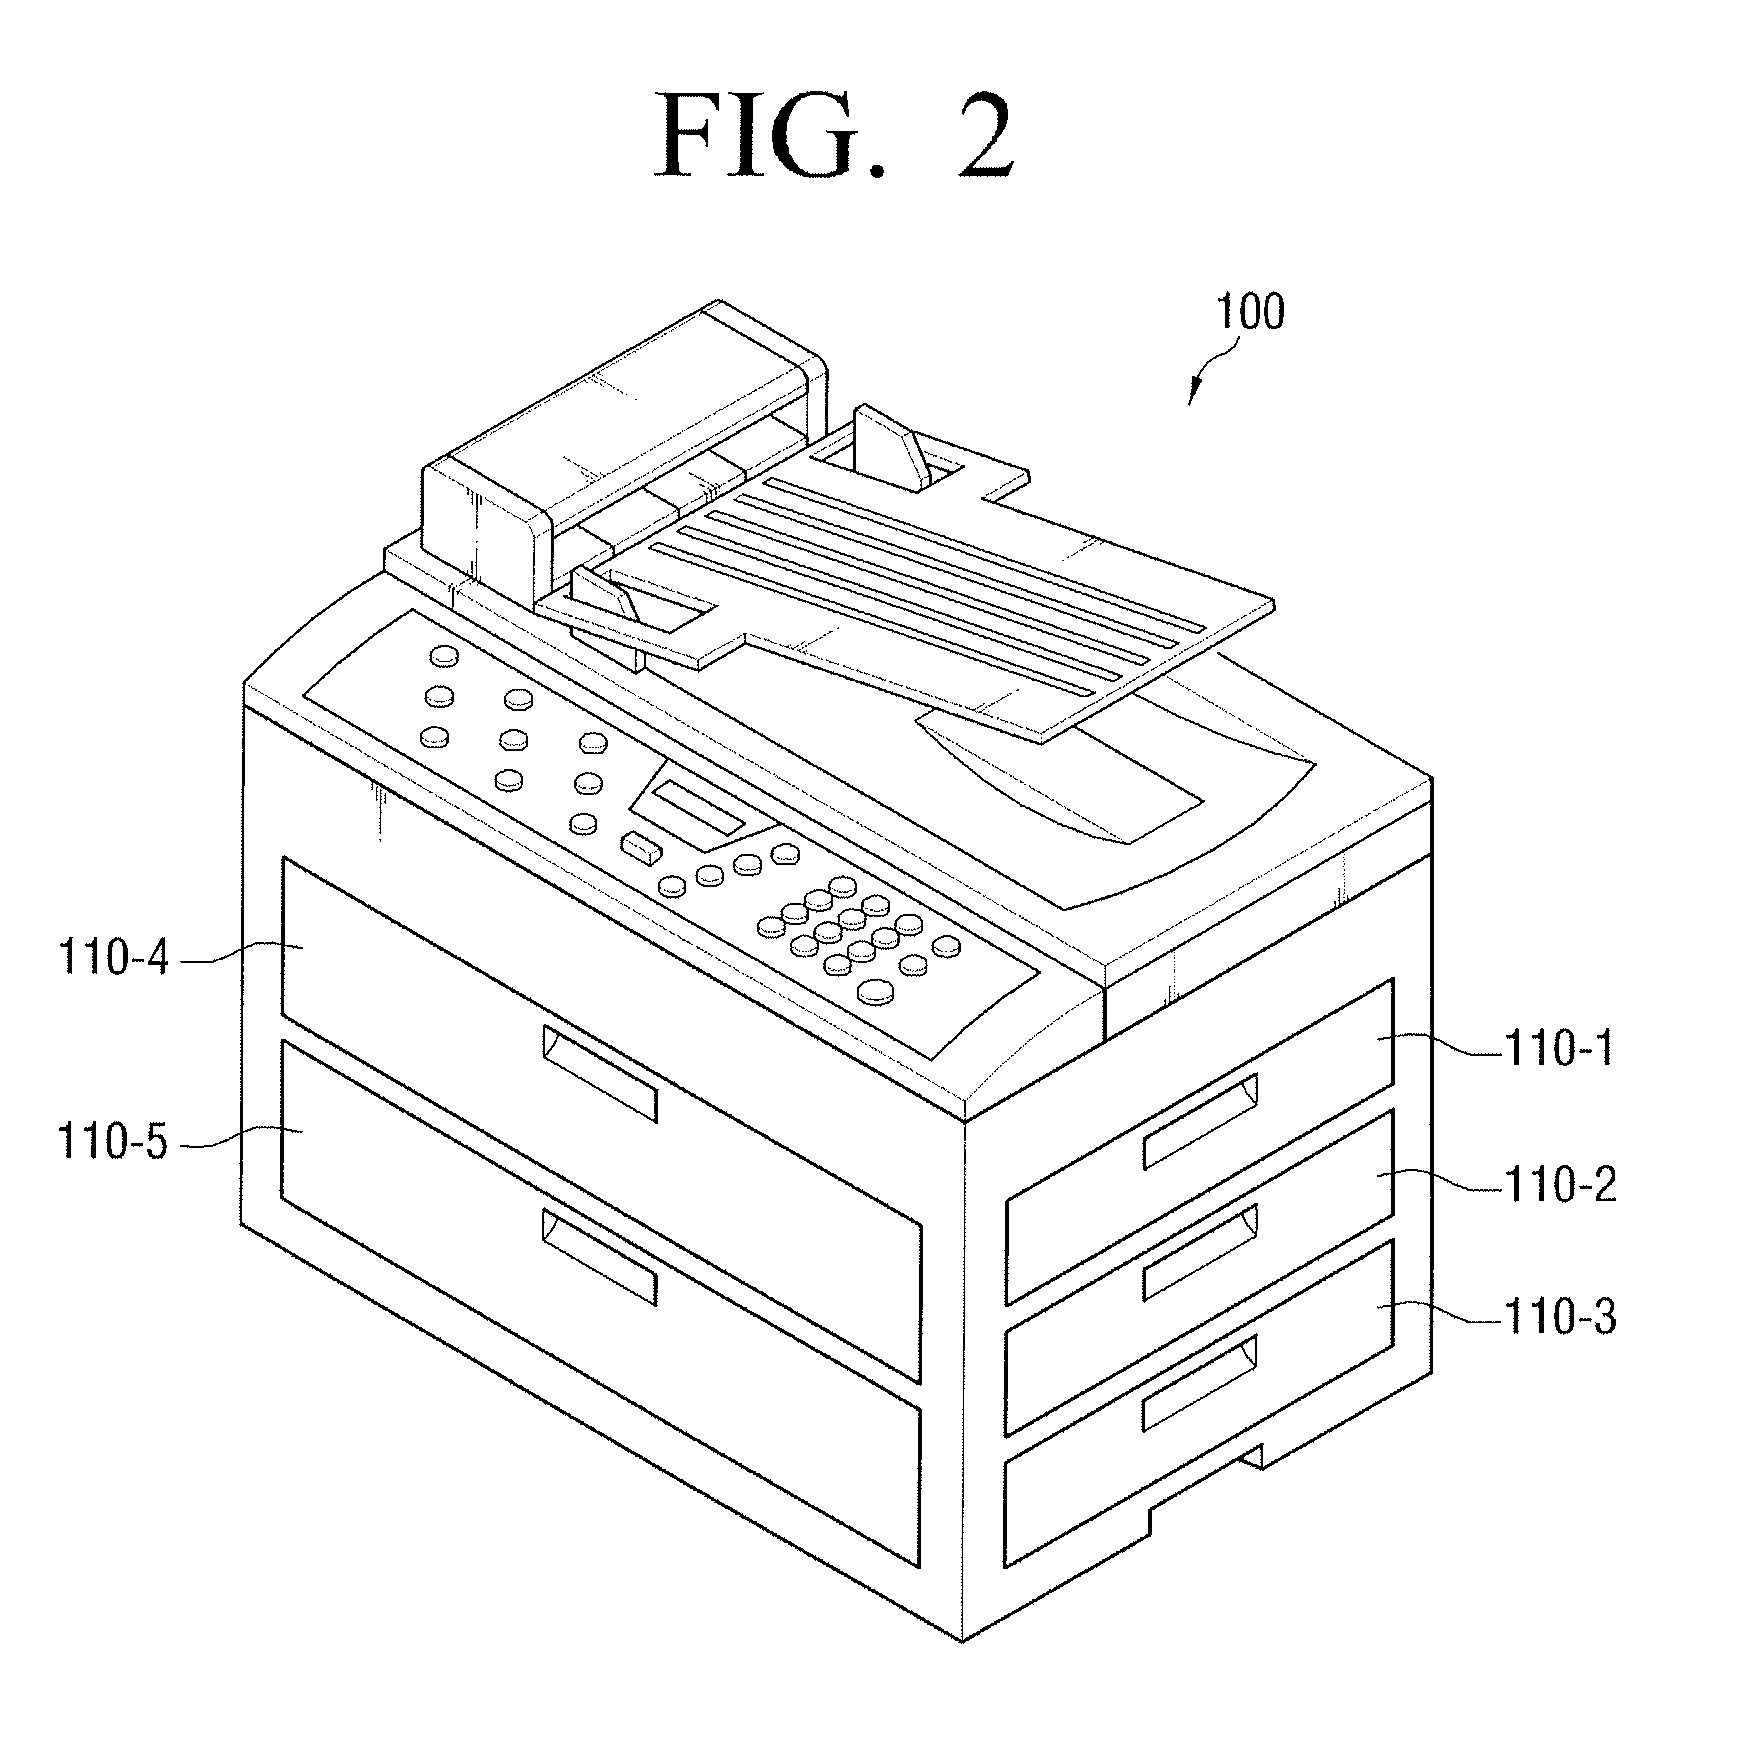 Image forming apparatus to control a power supply, and method thereof